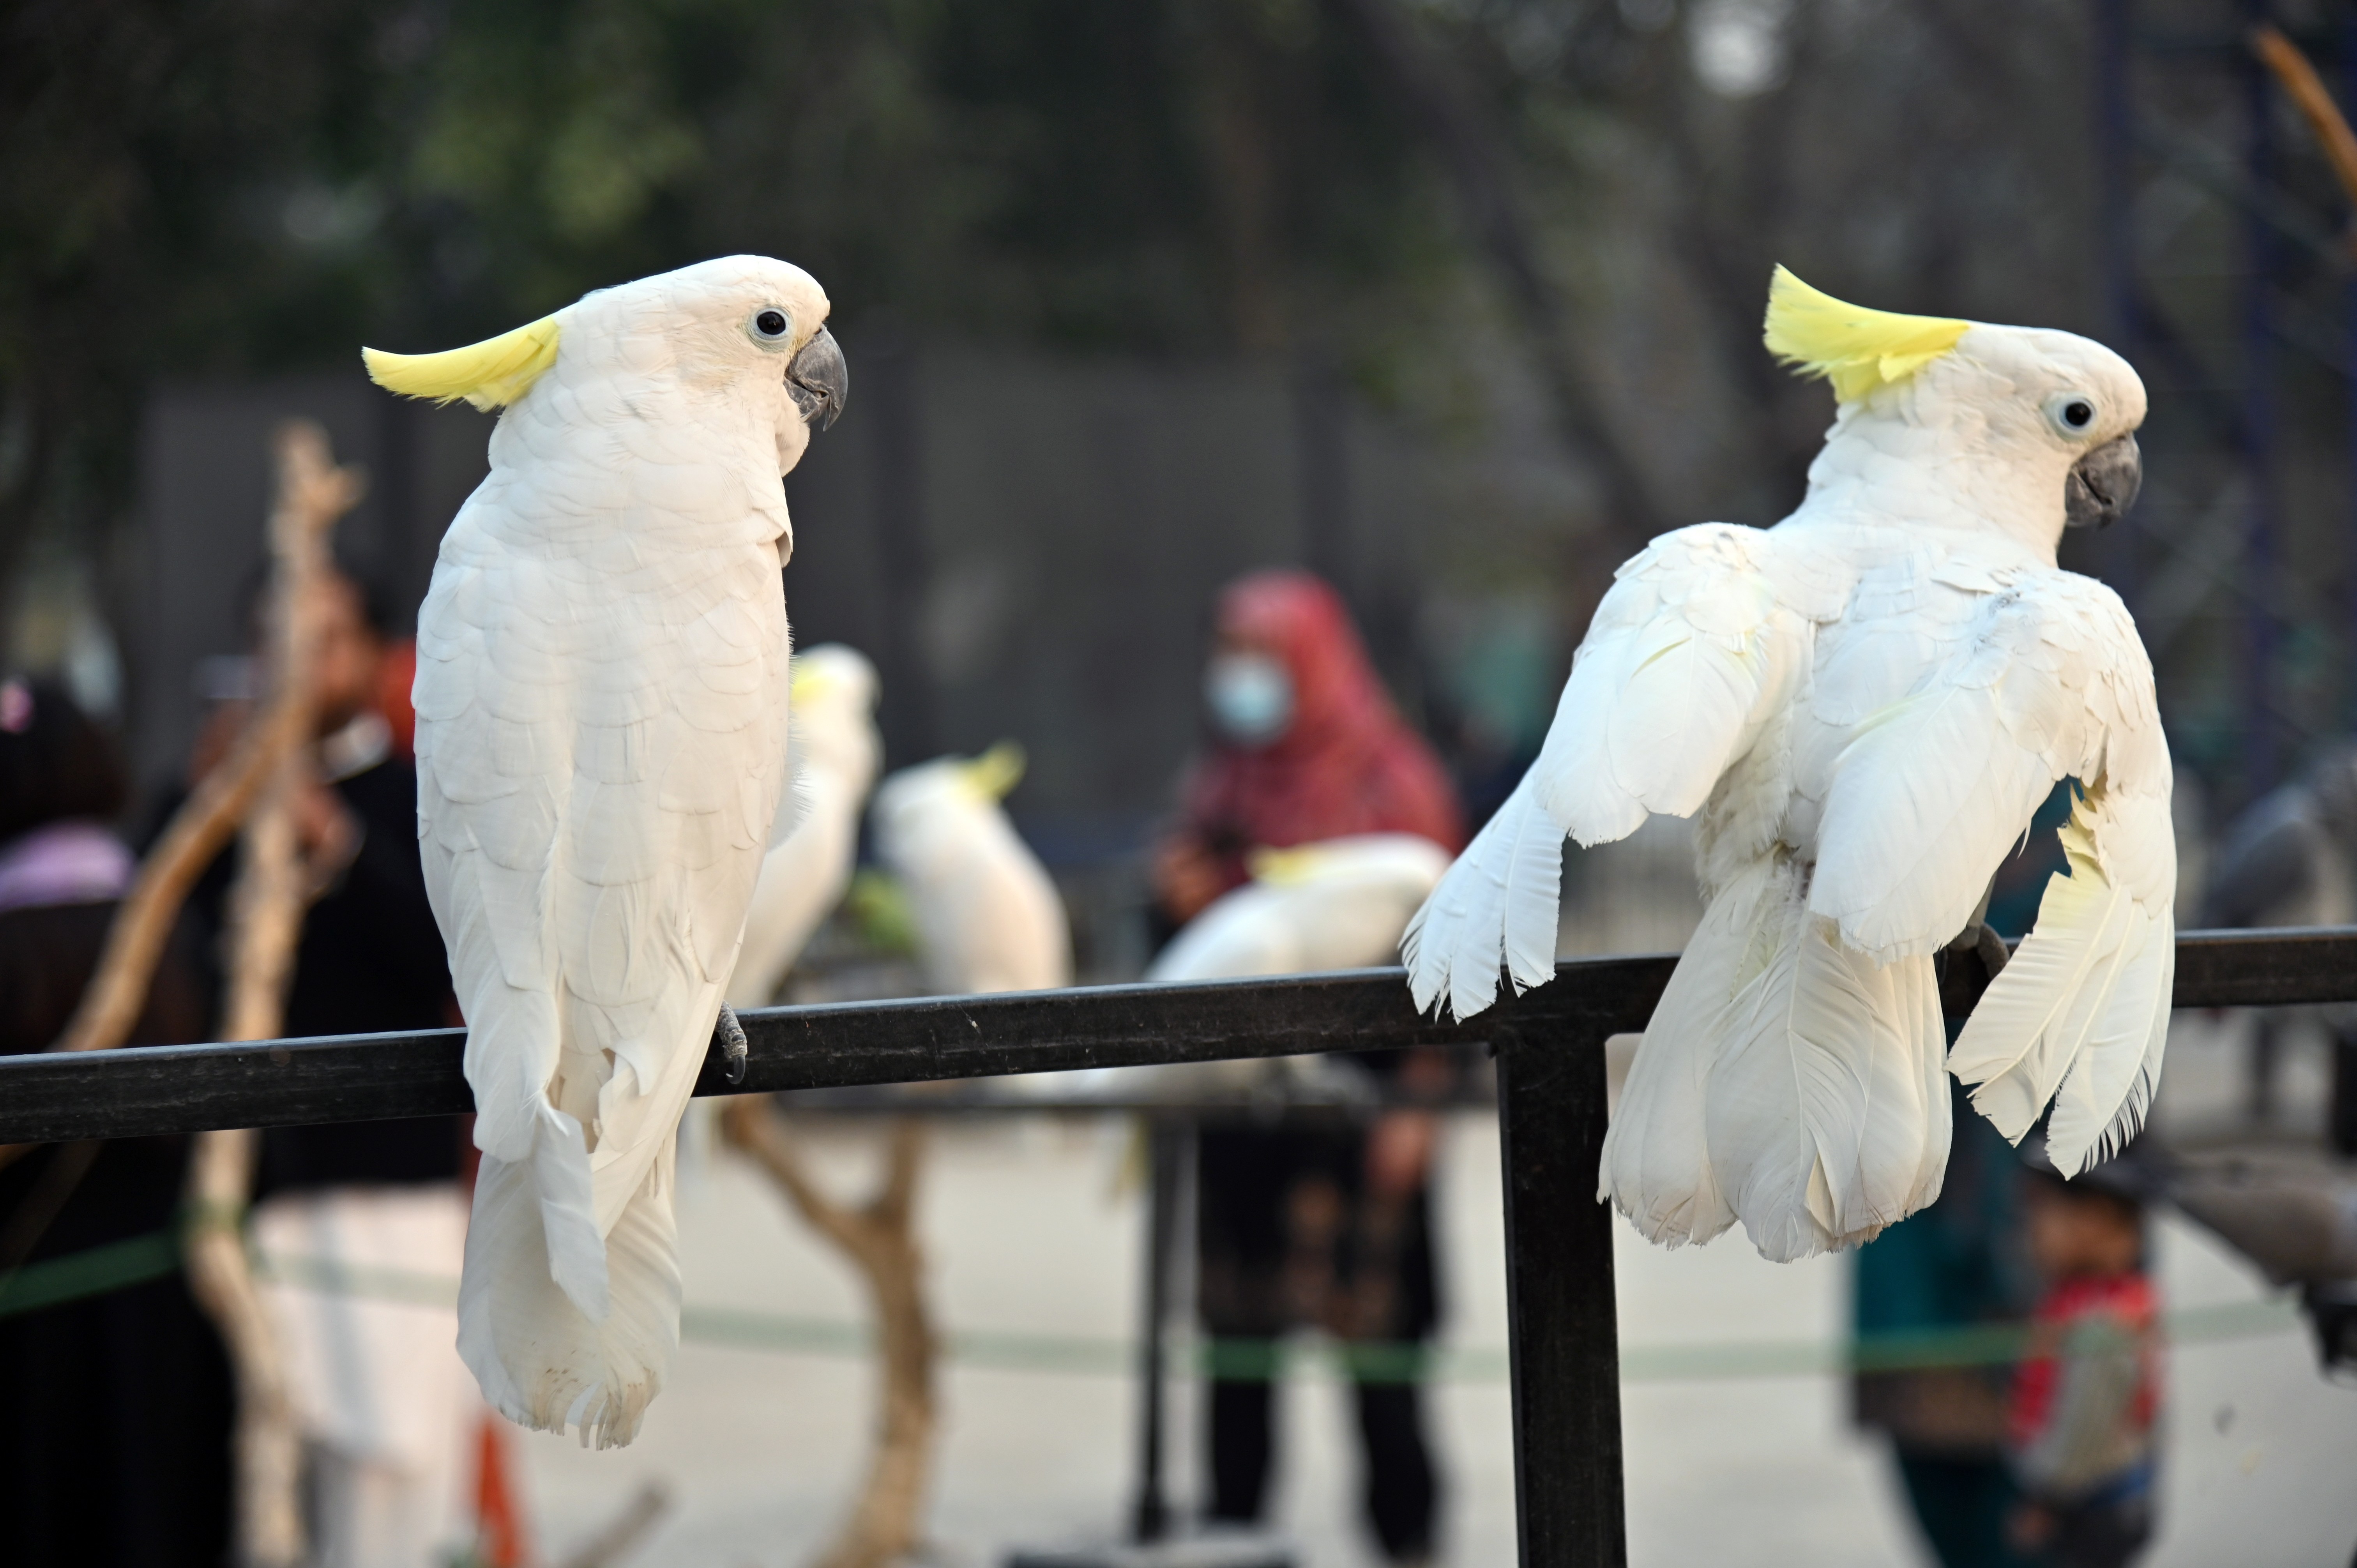 A pair of White cockatoo